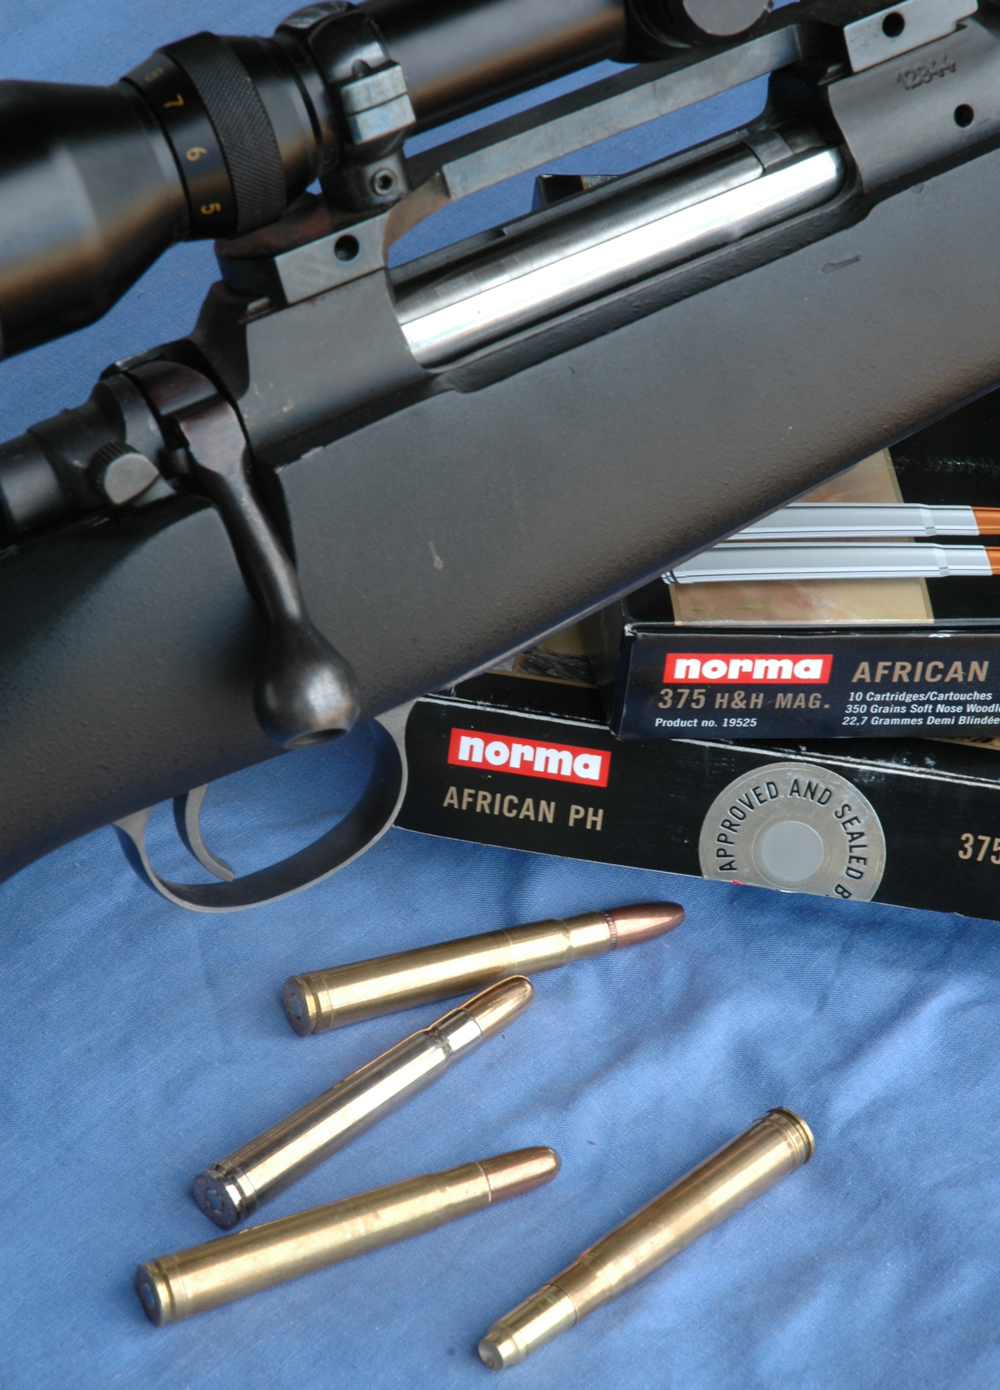 Wayne used this BRNO rifle in .375 for buffalo n Australia. He fired Norma Africa PH ammo featuring Woodleigh bullets.